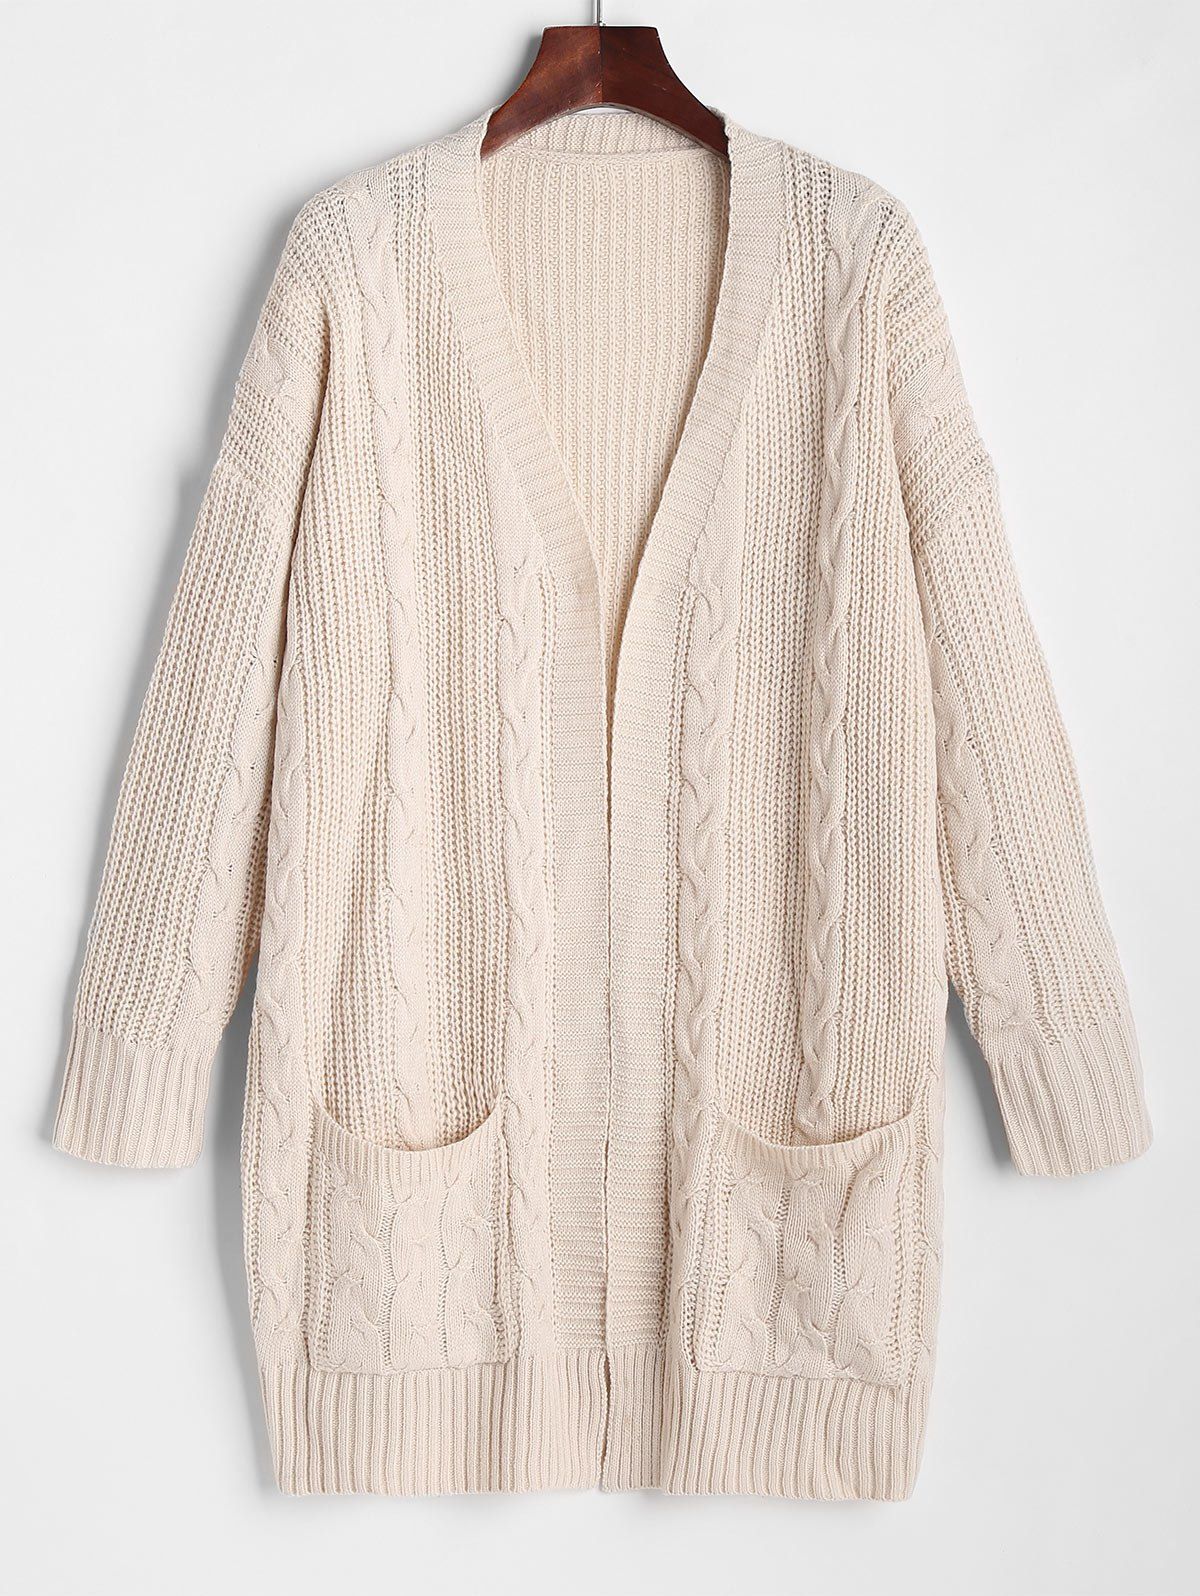 Cable Knit Patch Pocket Open Front Cardigan - LIGHT COFFEE L